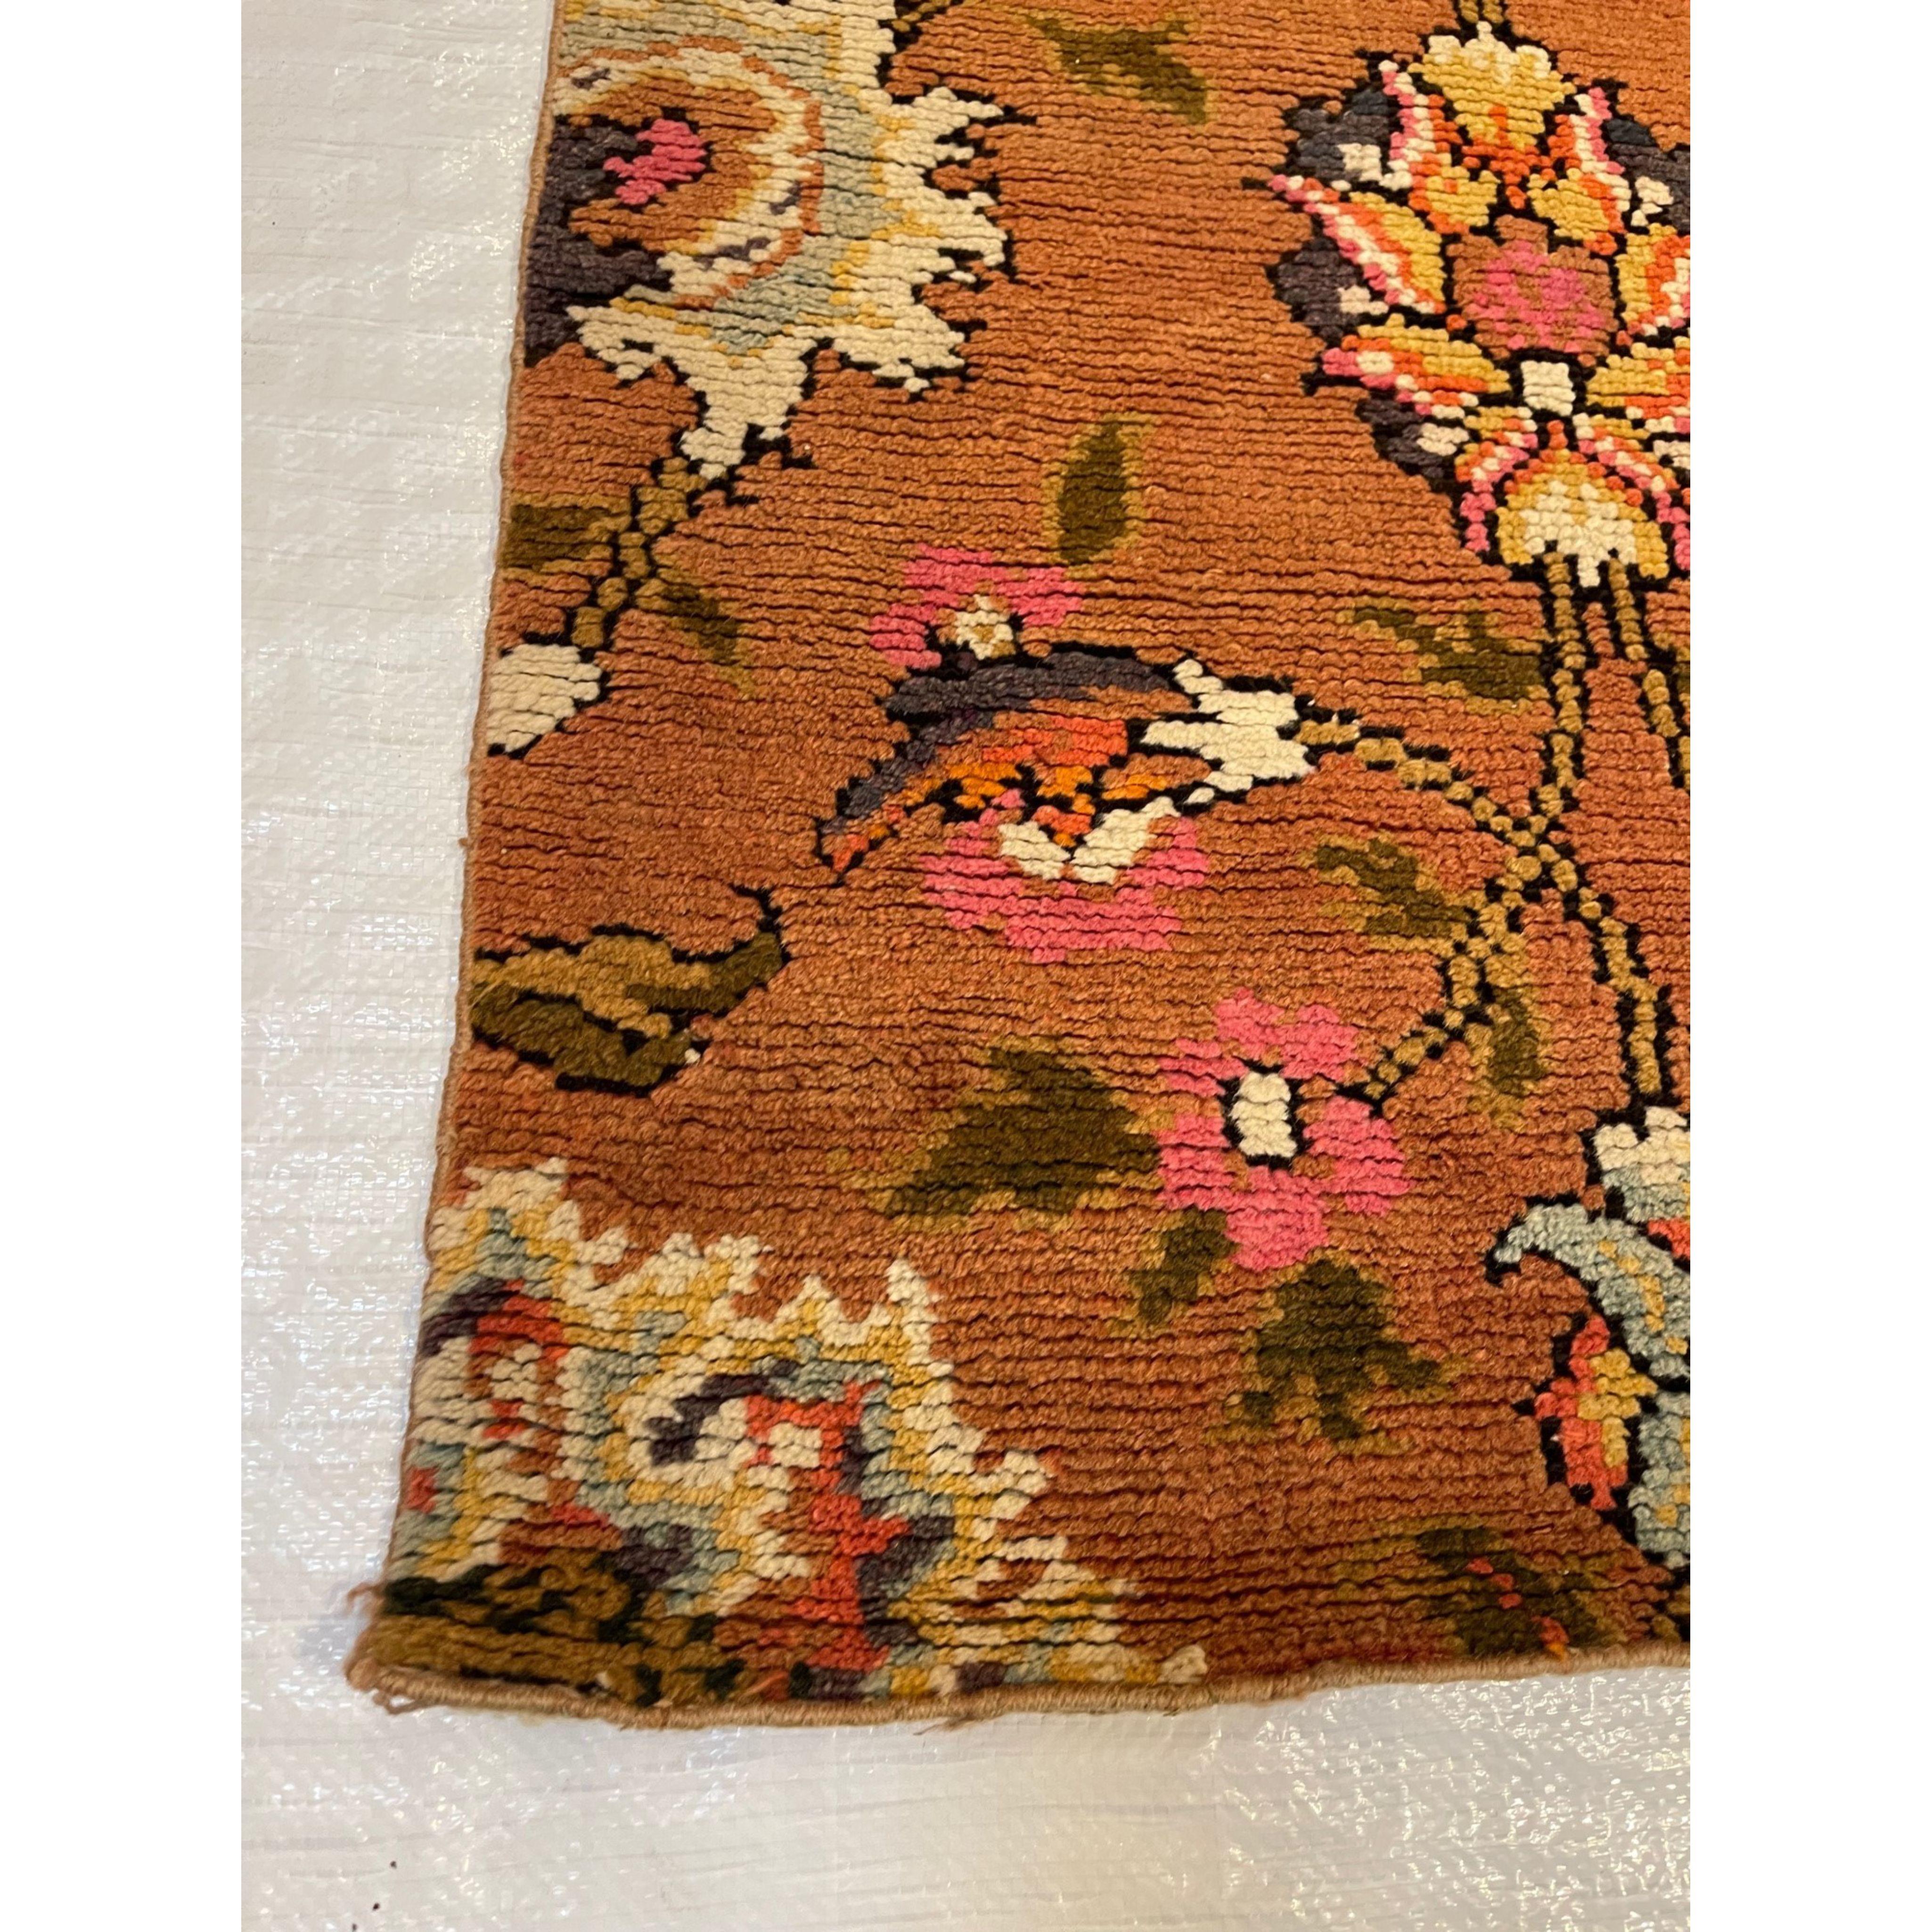 Ca.1920 Antique English Fragment Rug 4'3'' X 3'6'', handmade and hand-knotted piece ,
came from Europe to america back in 1950s and was made by weavers in Europe around 1920s.
English weavers were always focusing on their fine knots and were very